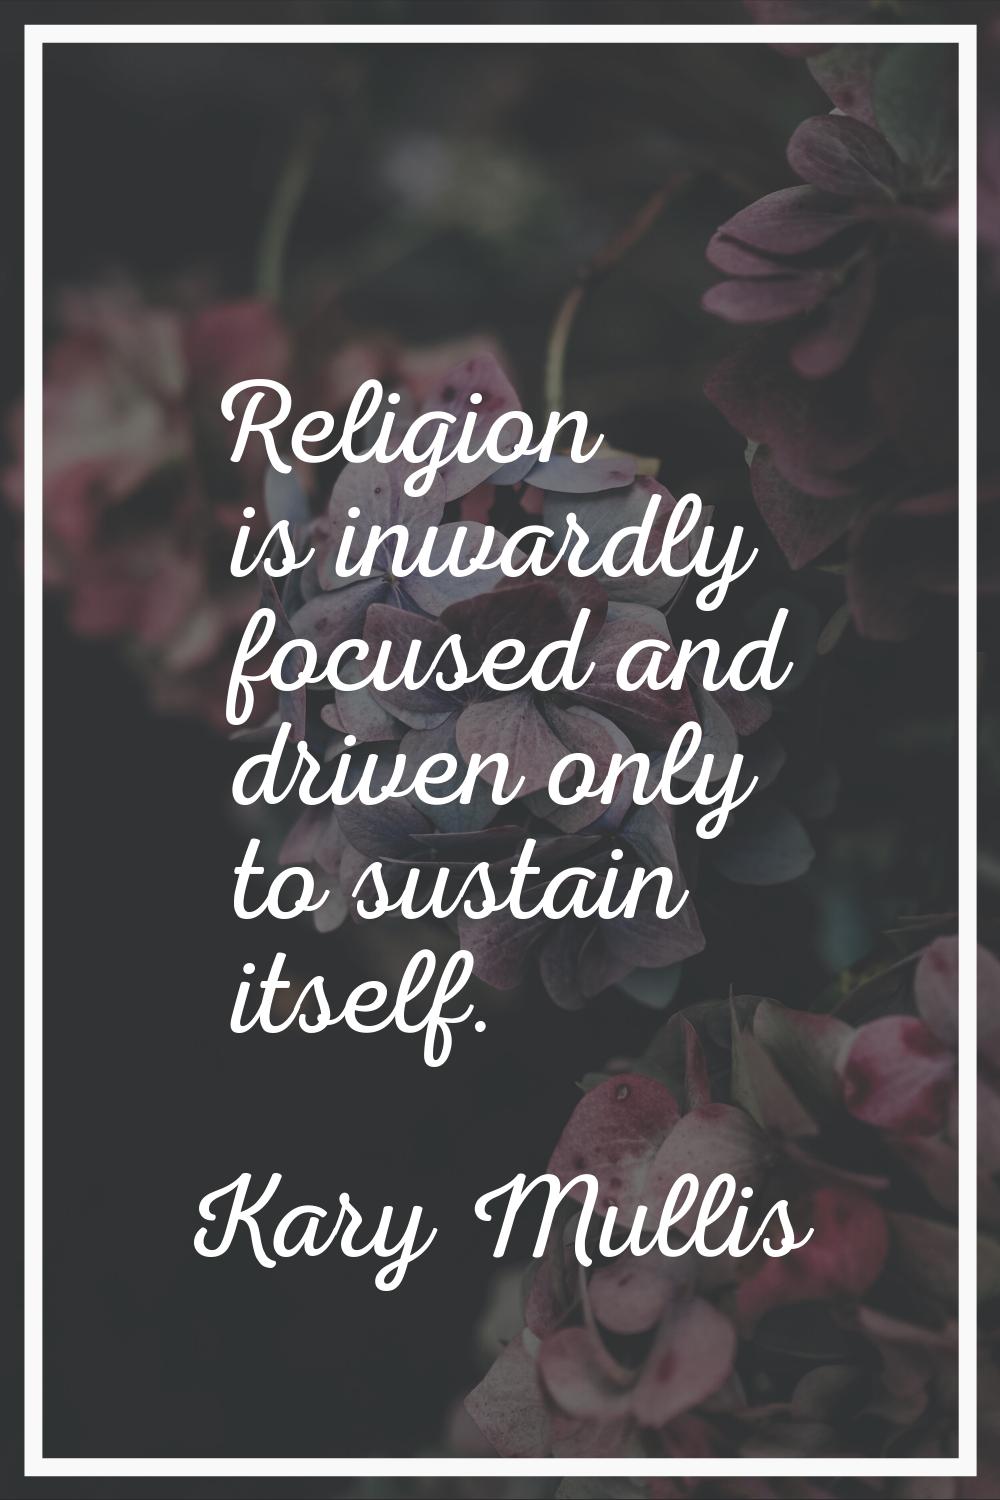 Religion is inwardly focused and driven only to sustain itself.